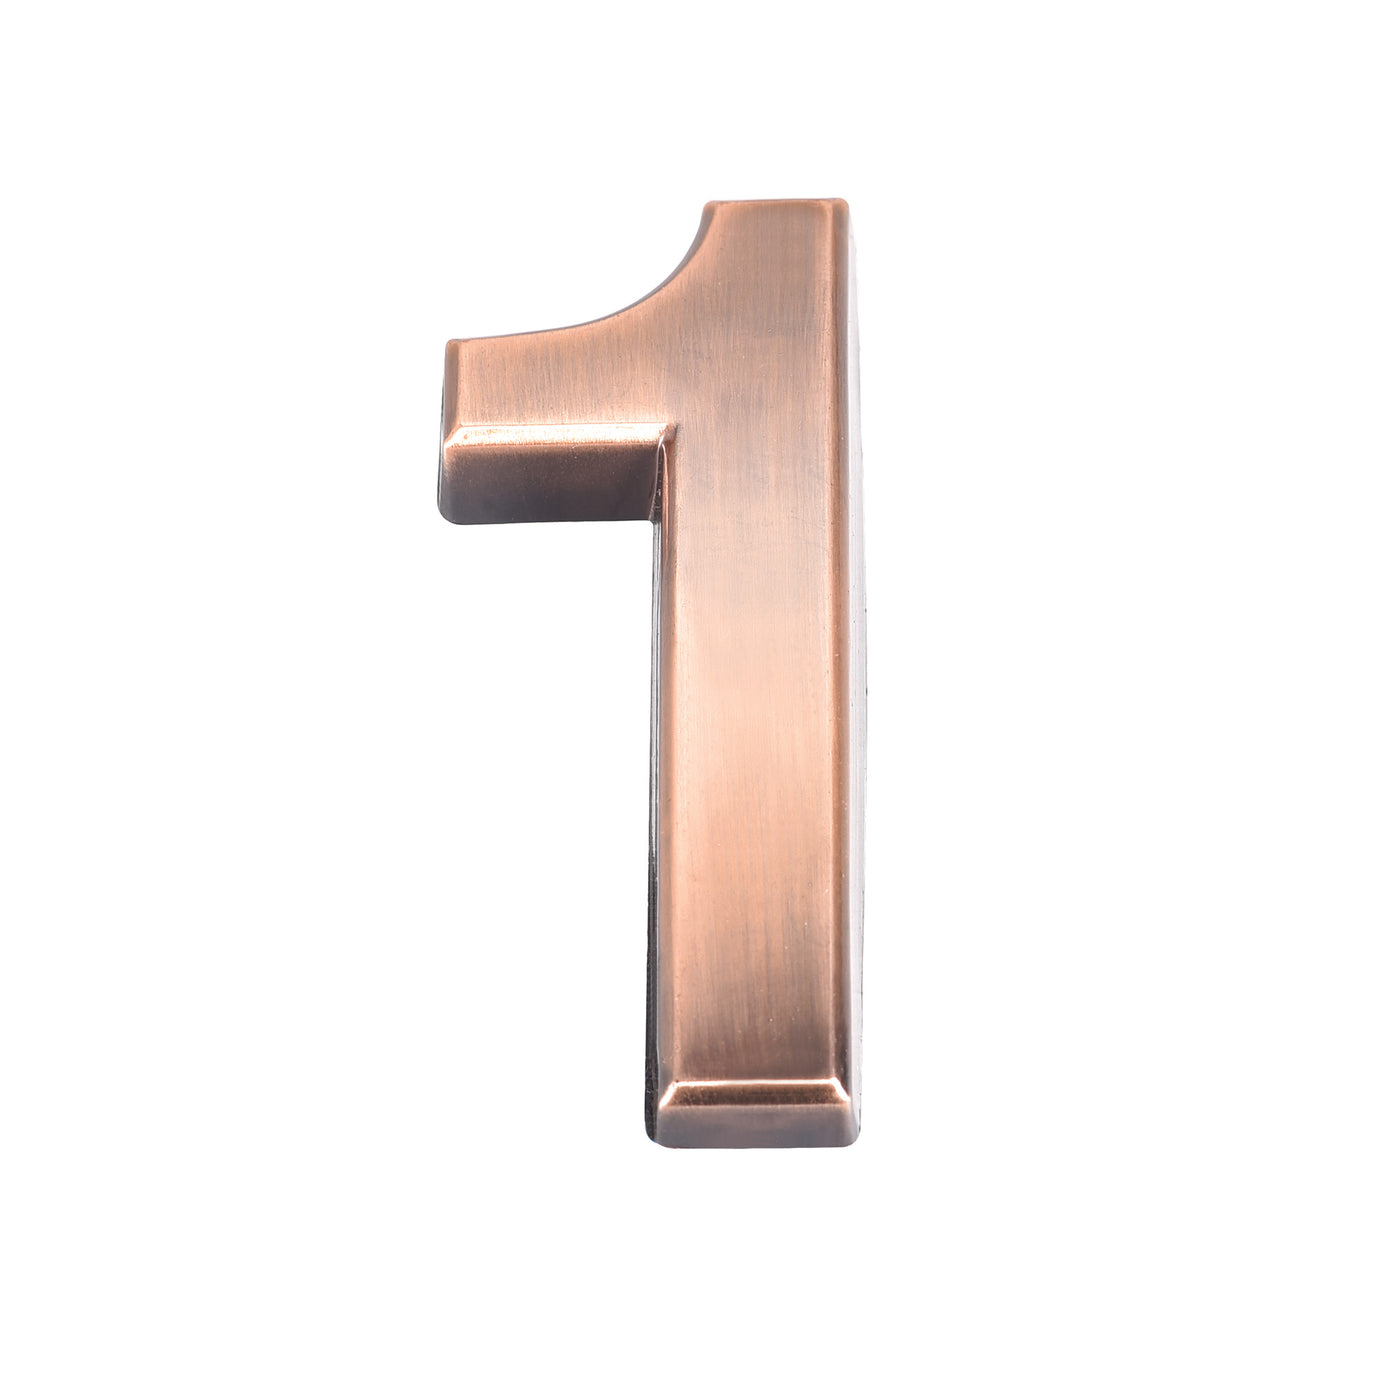 Uxcell Uxcell Self Adhesive House Number, 1.97 Inch ABS Plastic Number 1 for House Hotel Mailbox Address Sign Bronze Brushed 2 Pcs